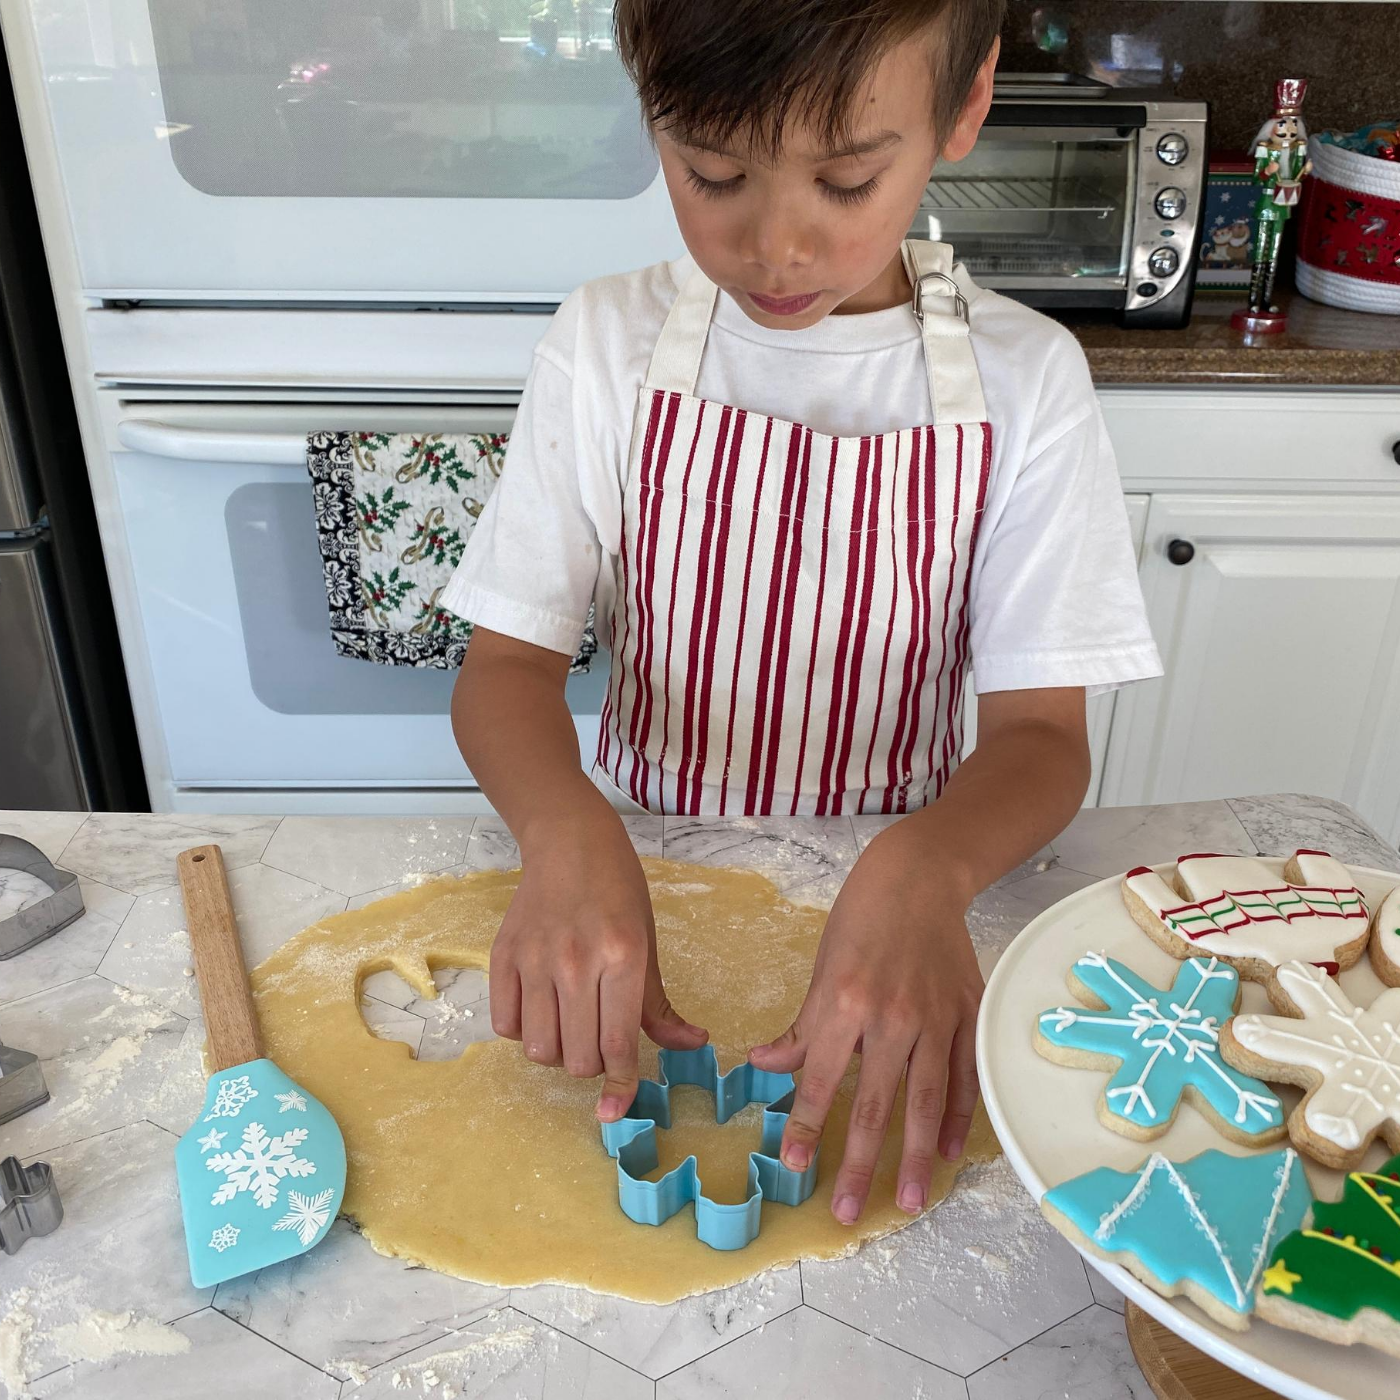 Lifestyle image of a child using the snowflake cookie cutter to cut out cookies 